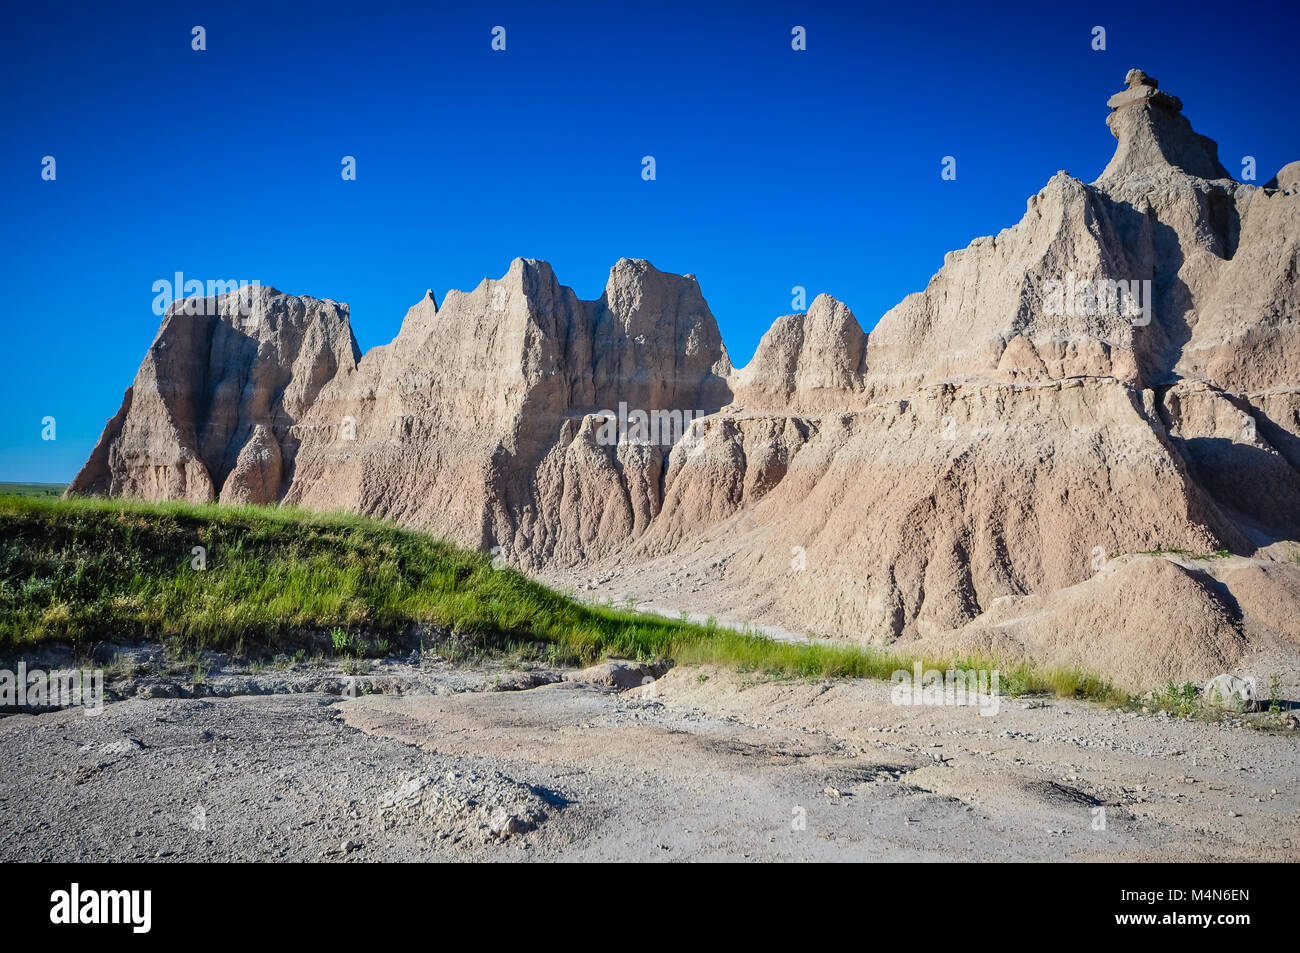 Horizontal view of painted desert in Badlands National Park shows layers of bright blue sunny sky, red and white striped hills, green grass, and grave Stock Photo